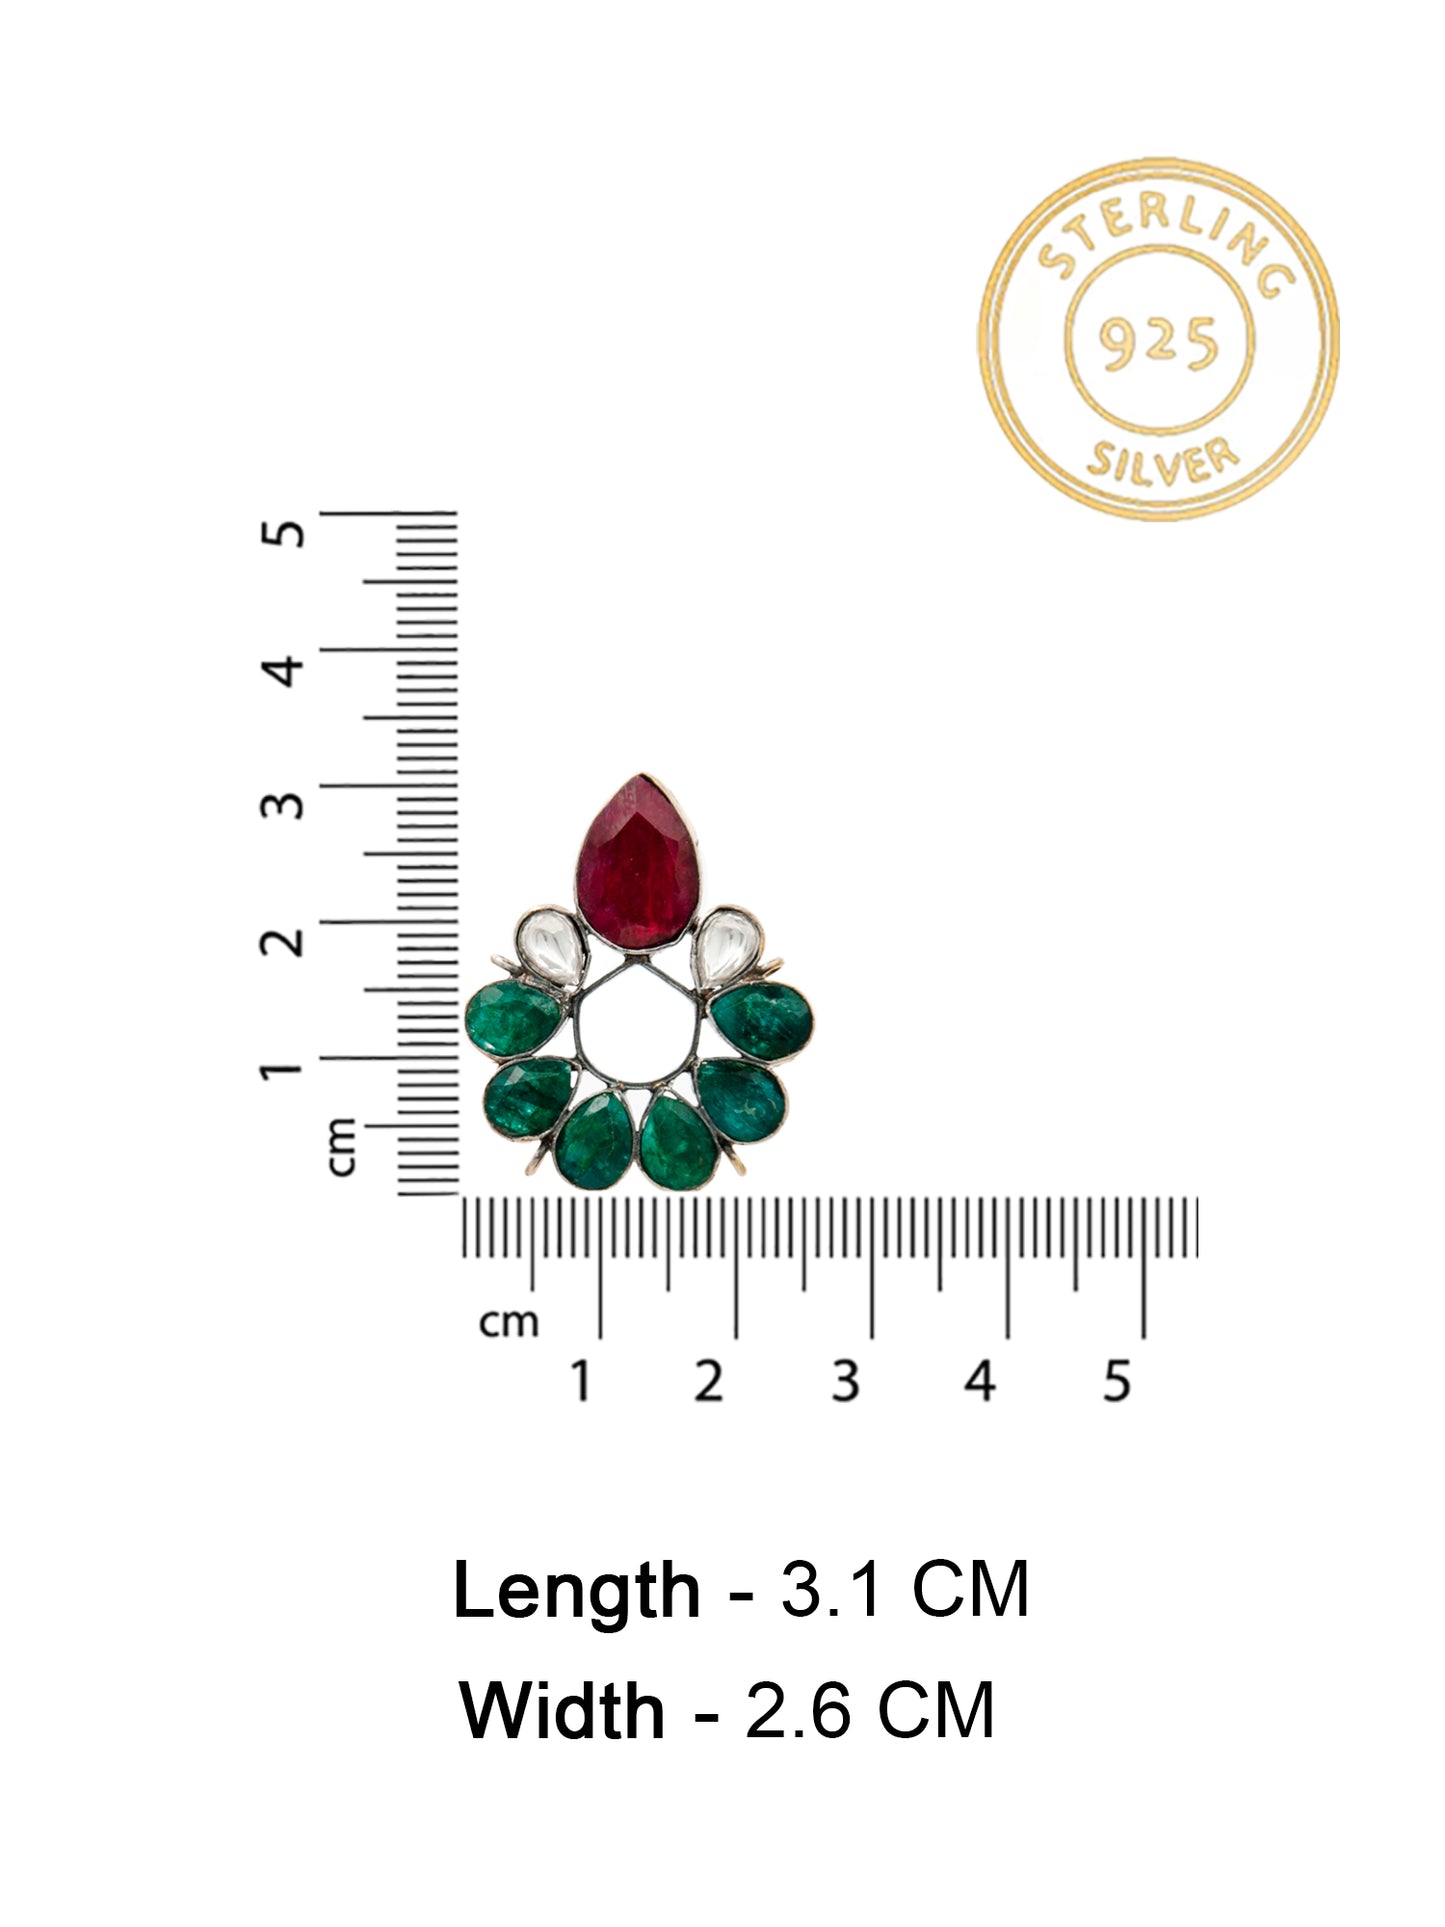 Regal Harmony: 925 Sterling Silver Earrings with Green Onyx, Ruby, and Kundan